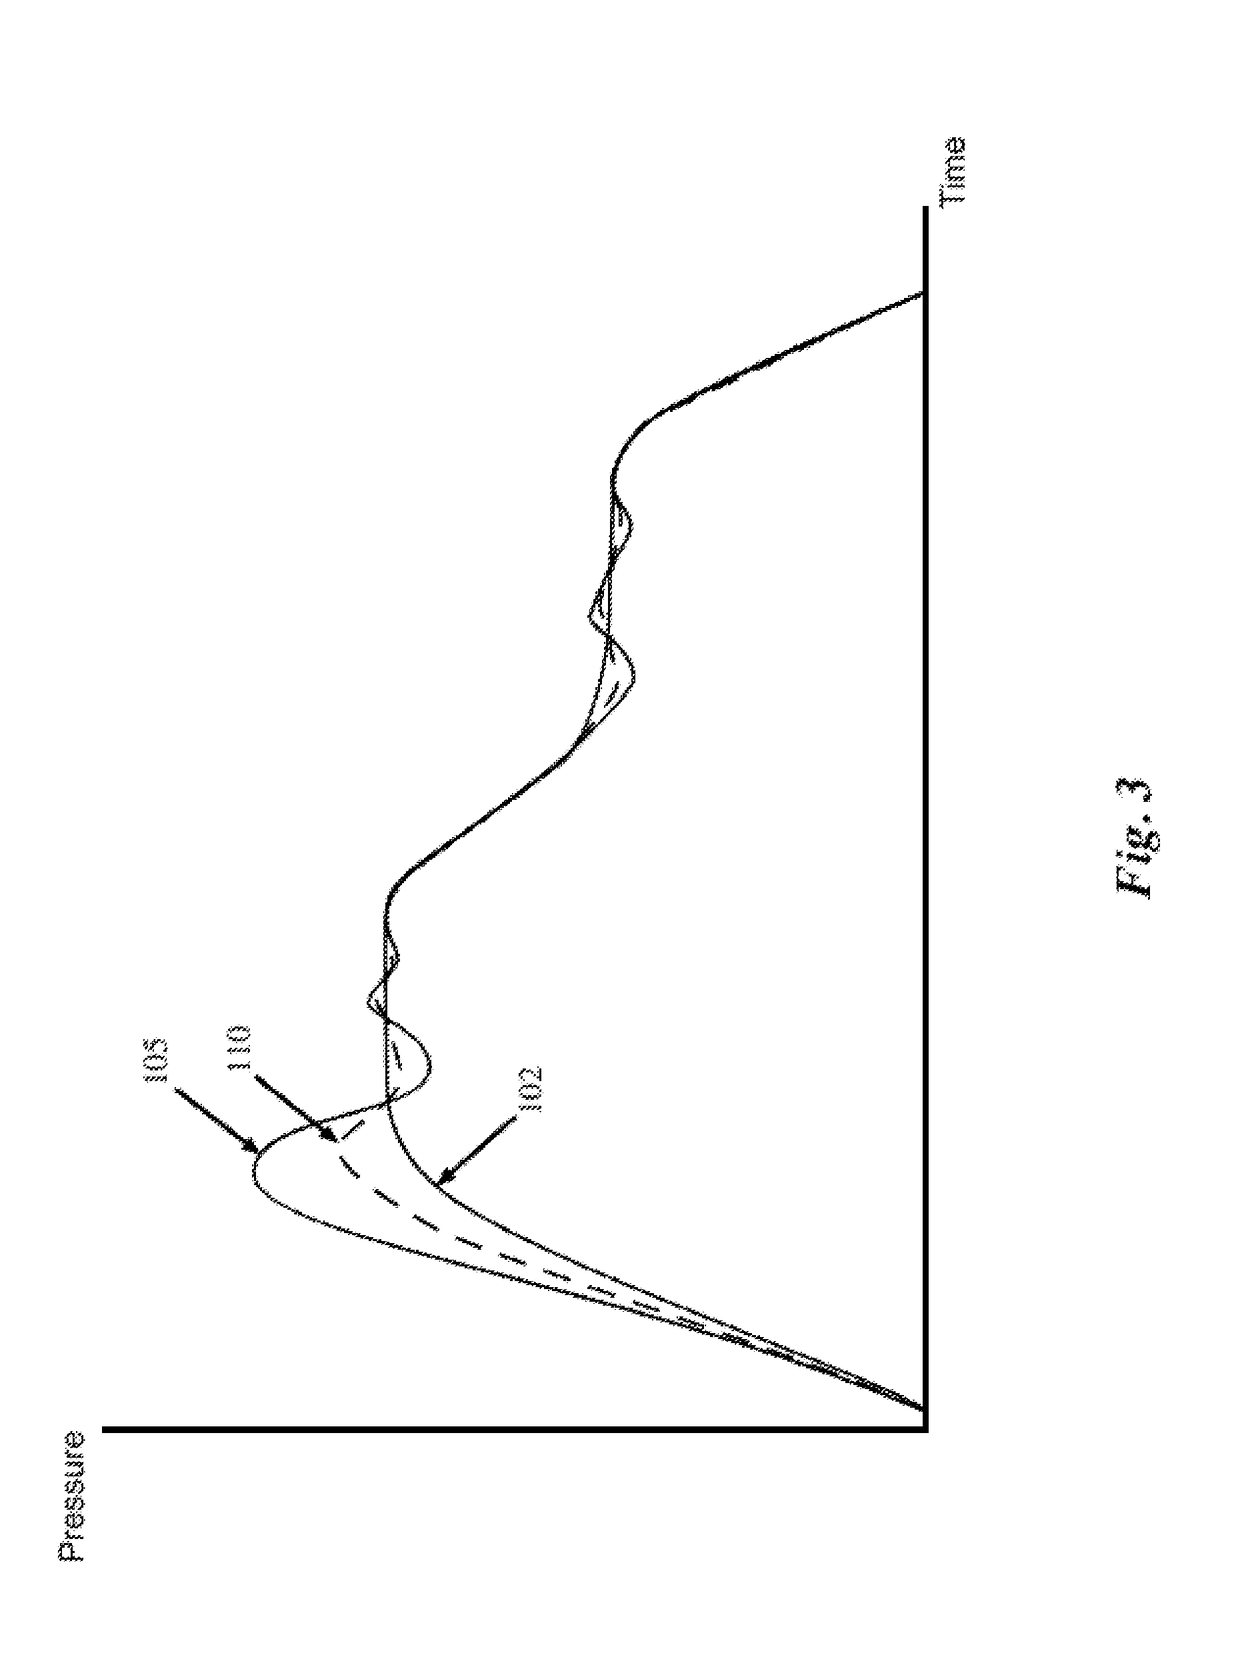 Systems and methods for autotuning PID control of injection molding machines